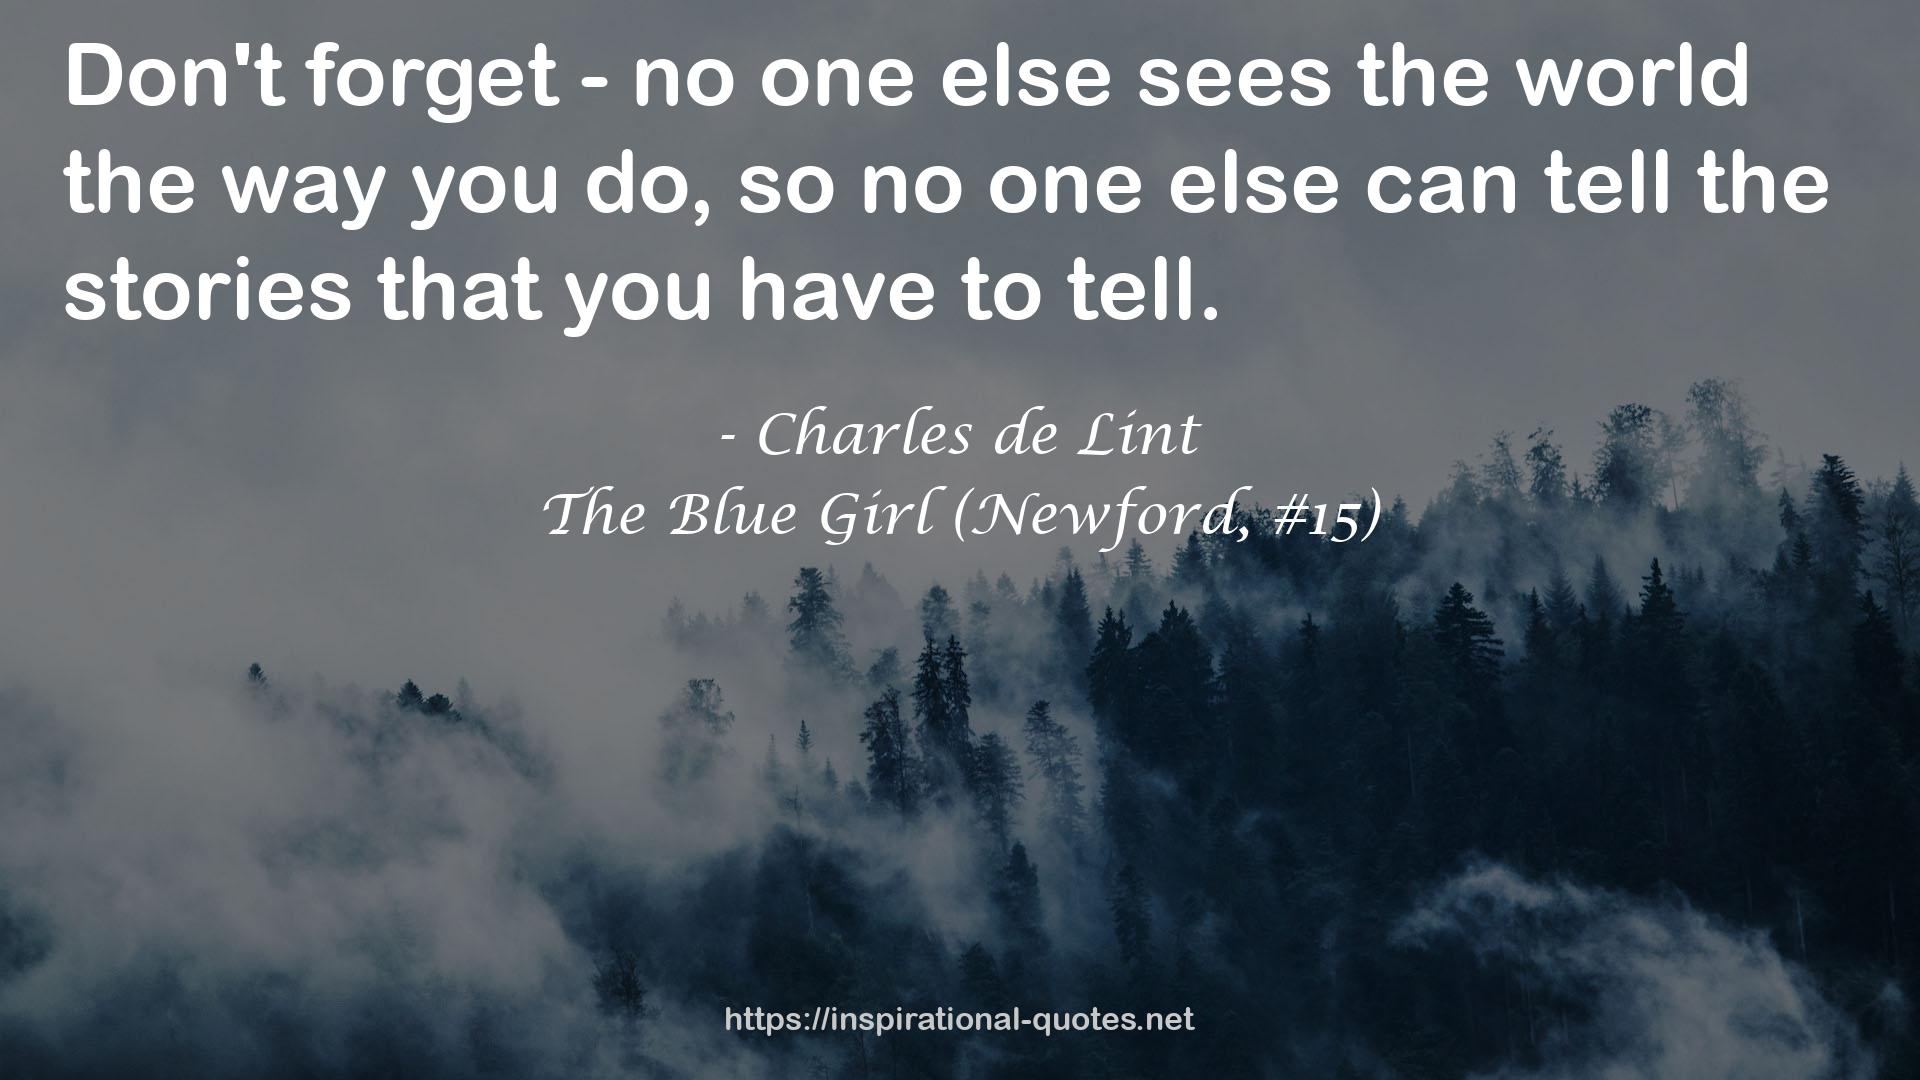 The Blue Girl (Newford, #15) QUOTES